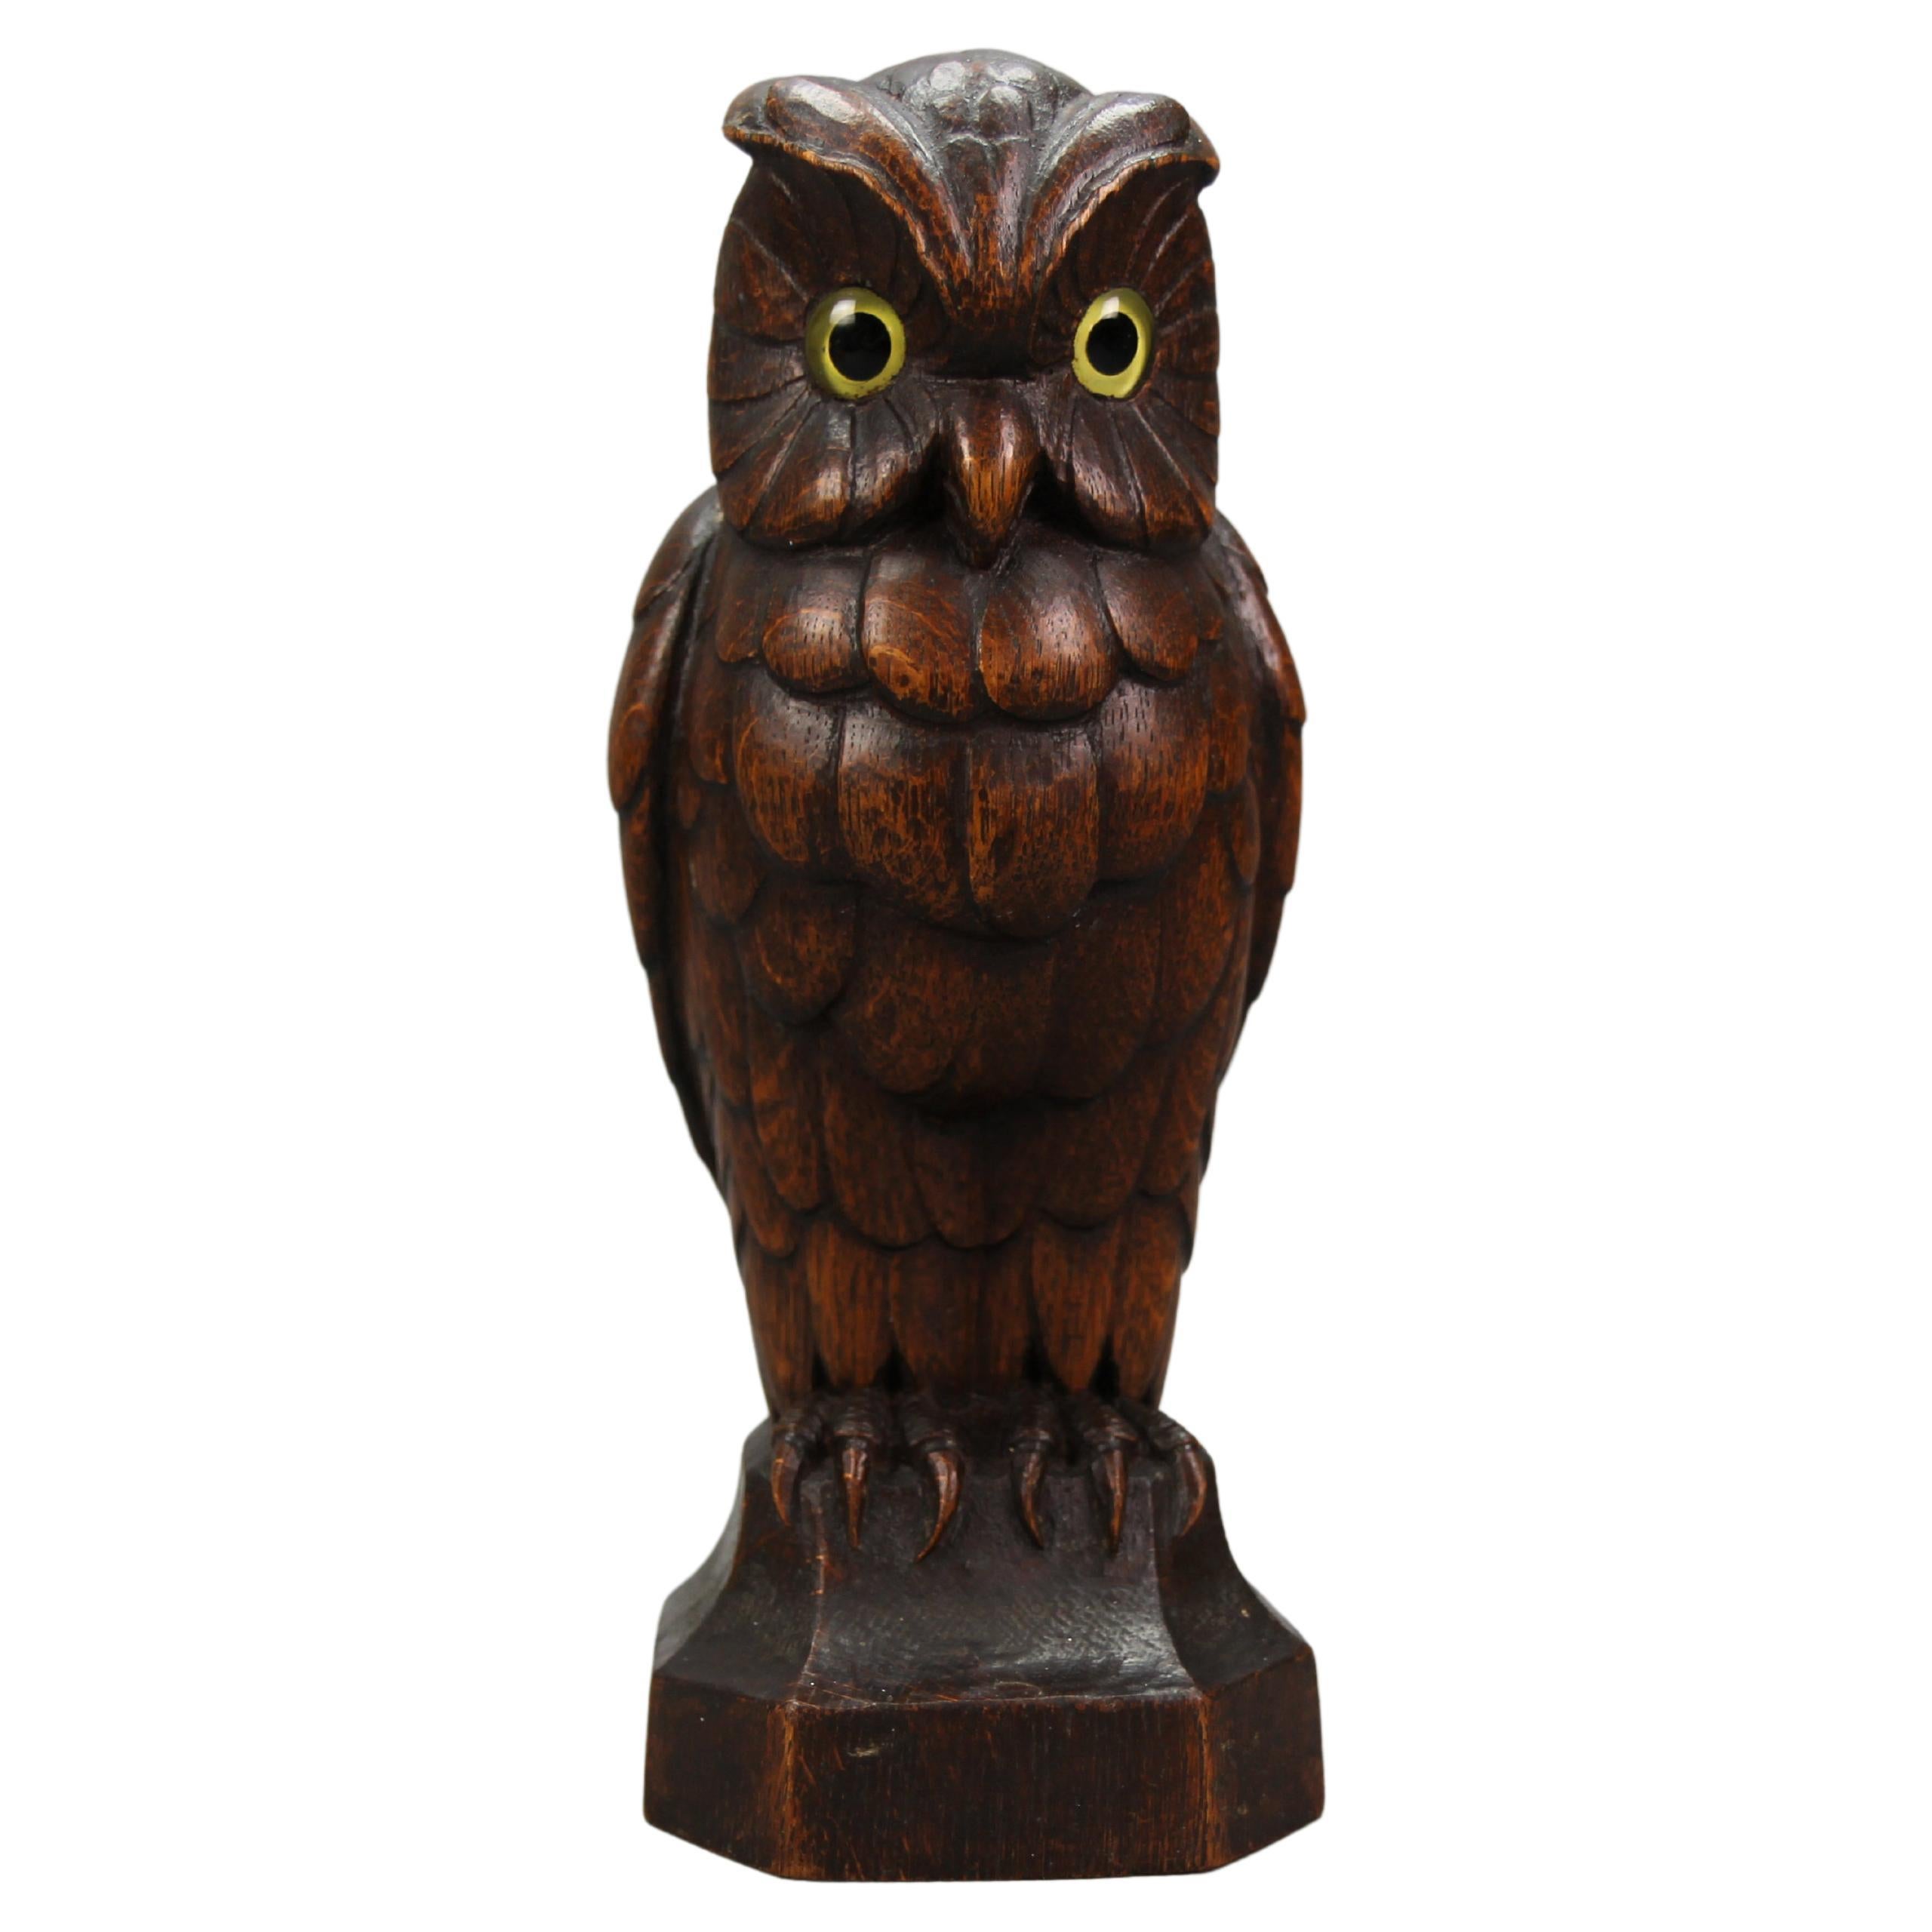 Hand-Carved Oakwood Owl Sculpture with Glass Eyes, Germany, 1930s